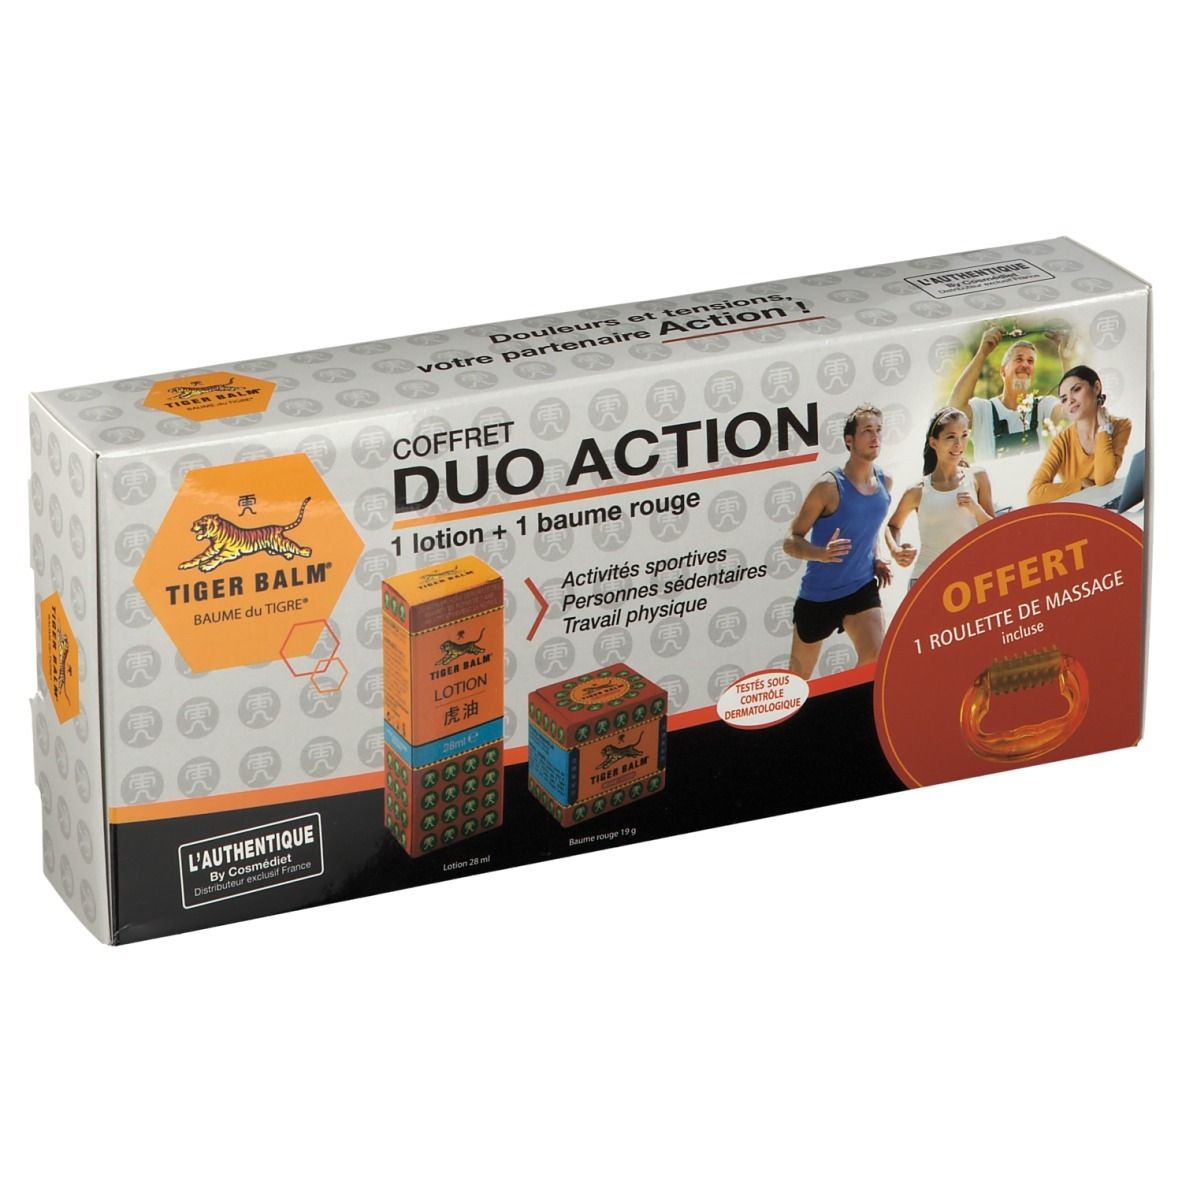 Image of BAUME du TIGRE® DUO ACTION